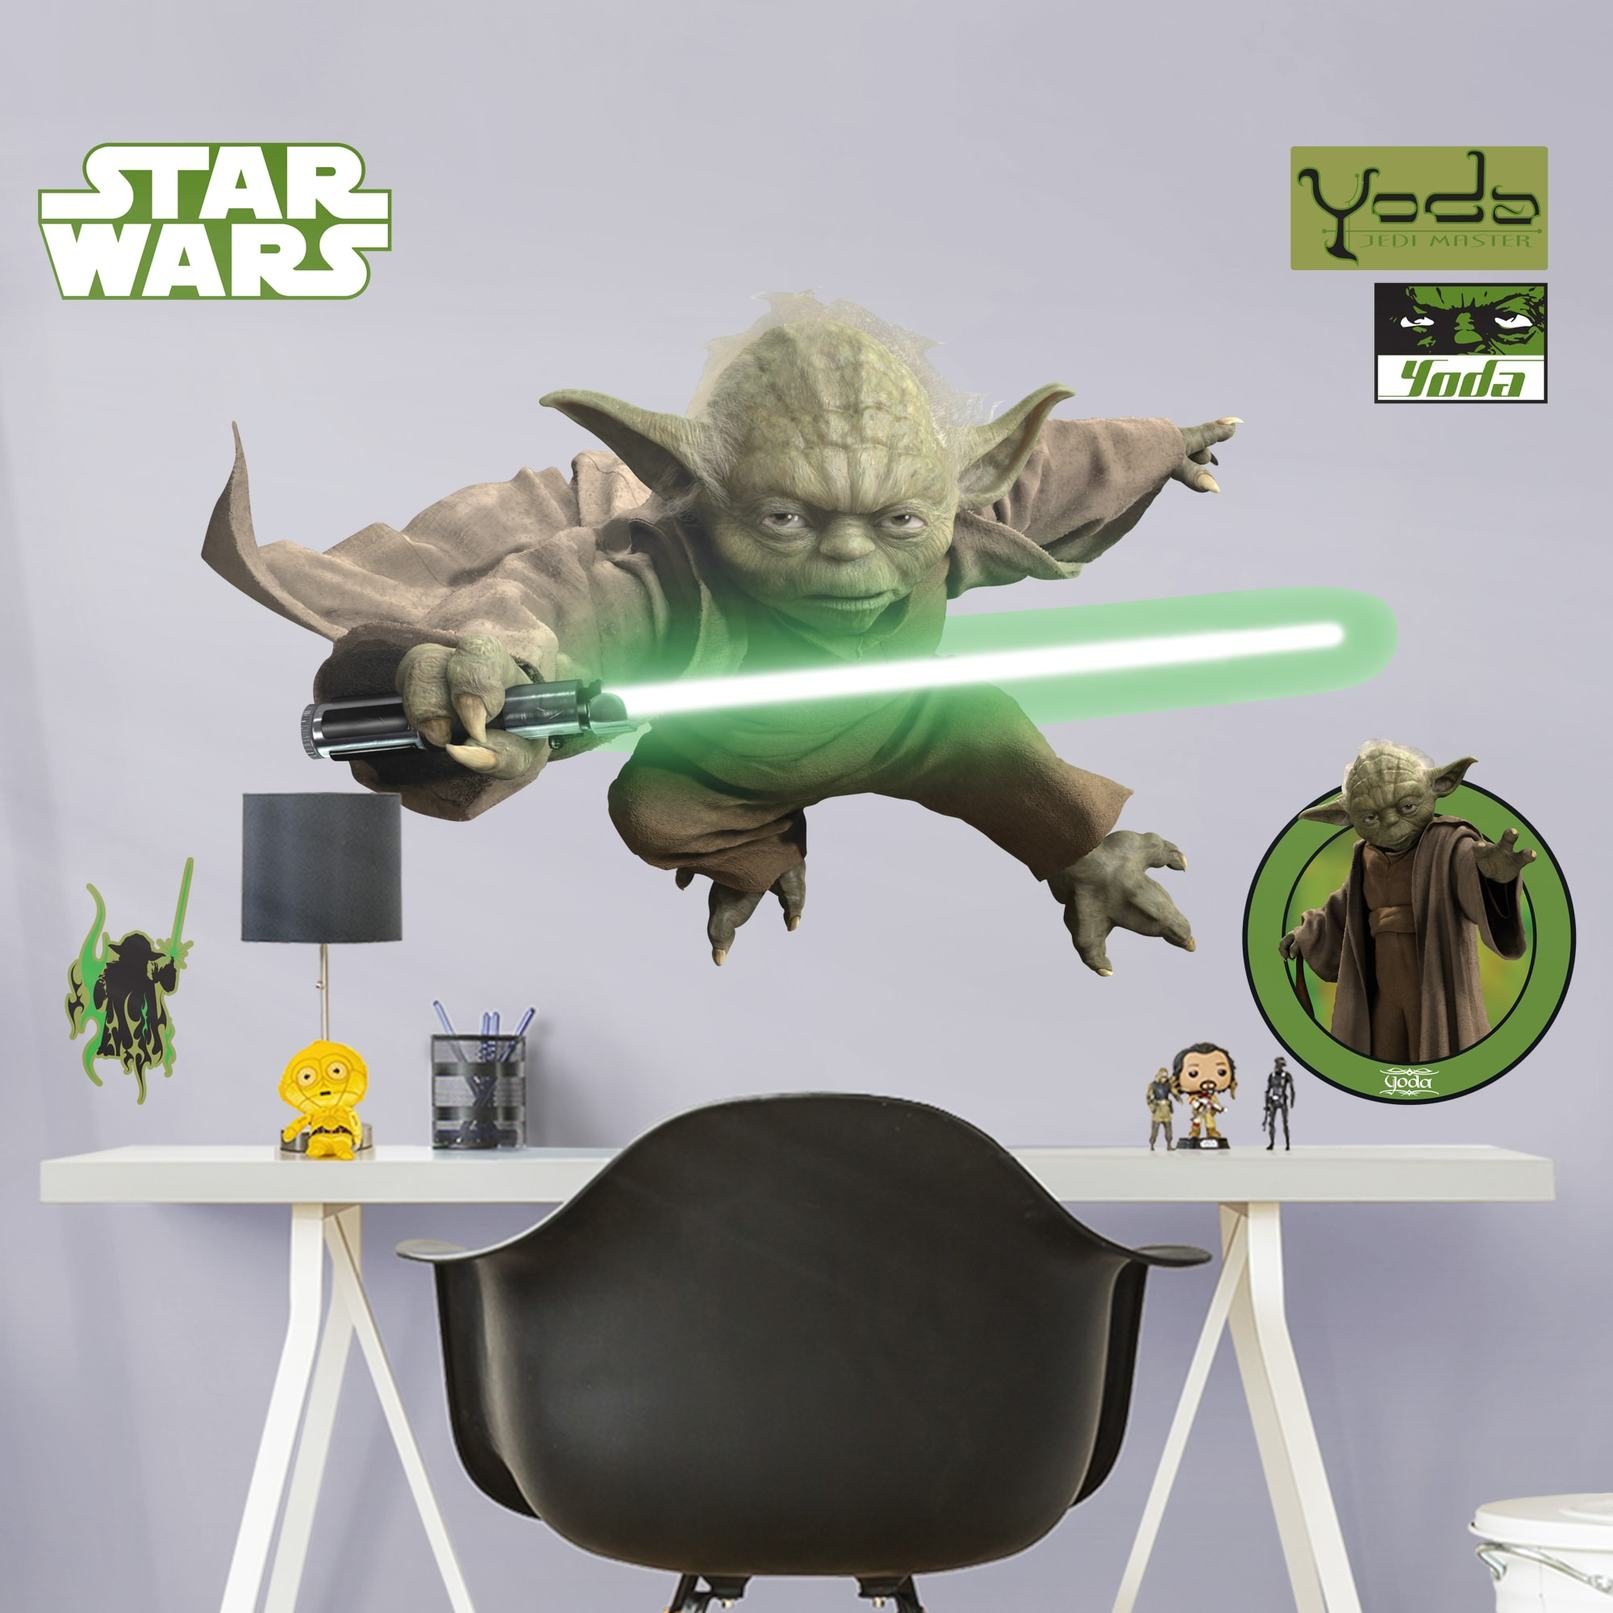 https://fathead.com/collections/star-wars/products/m92-92009?variant=33065833463896